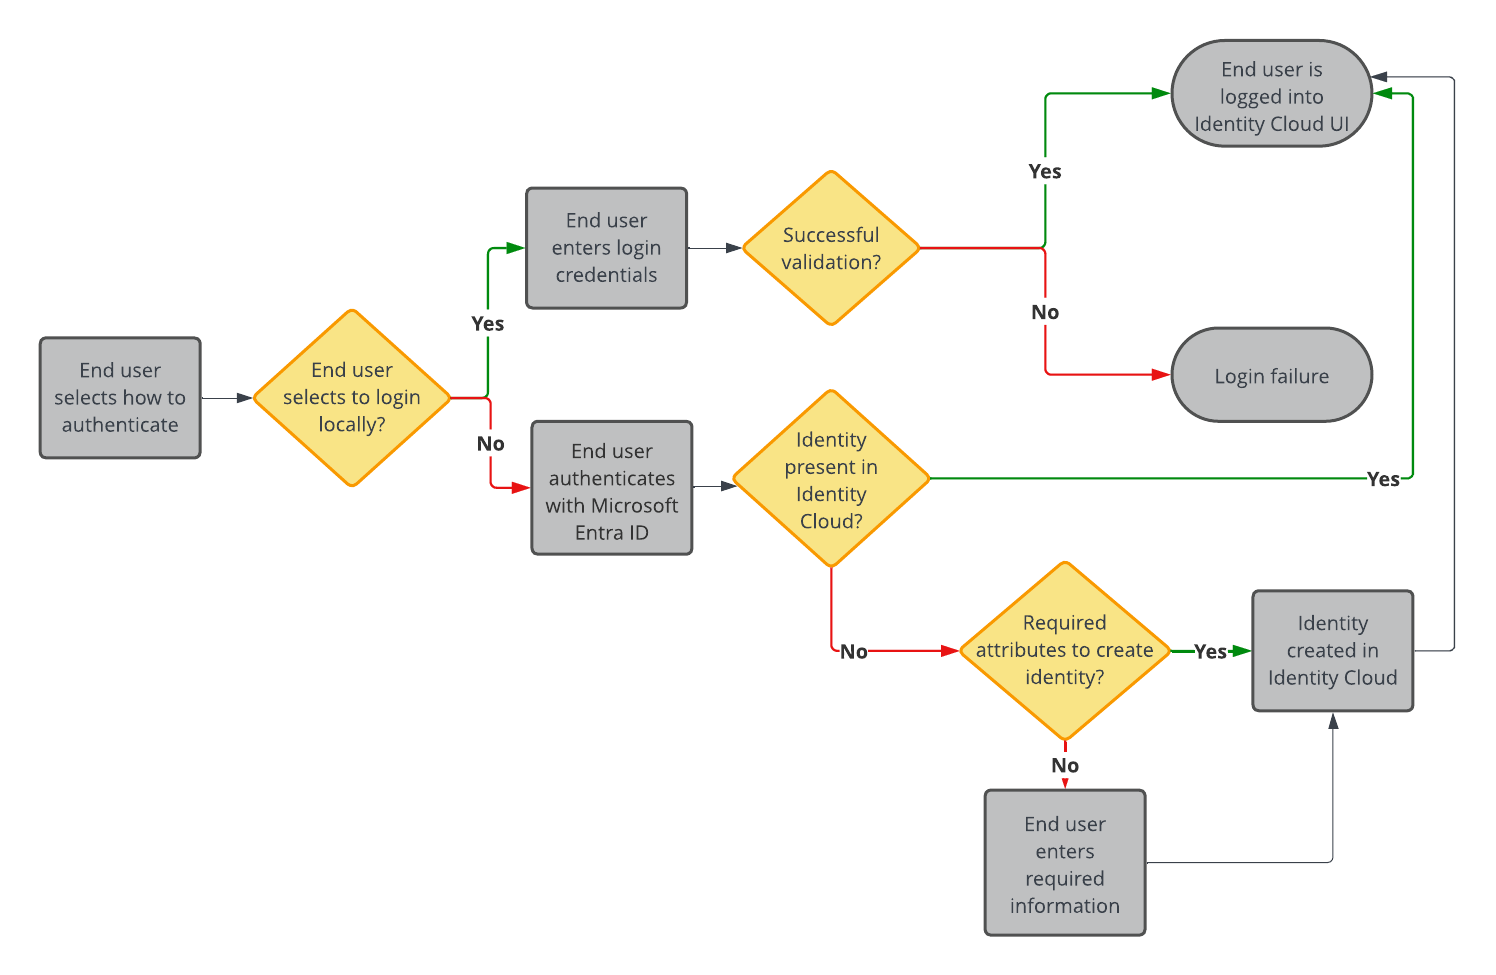 Flowchart of the different paths that can be taken in the social authentication journey